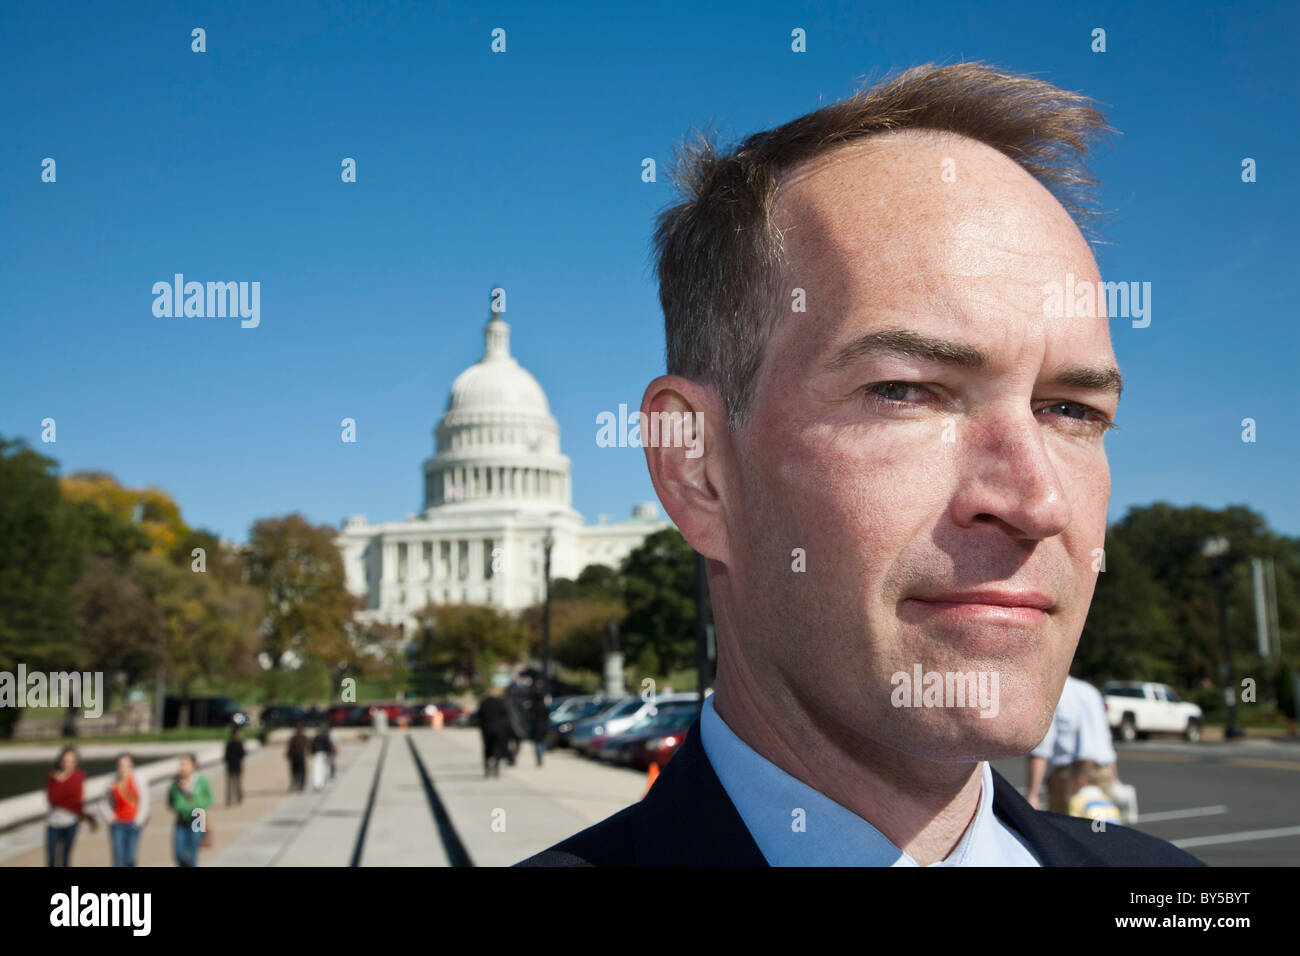 A politician in front of the US Capitol Building Stock Photo